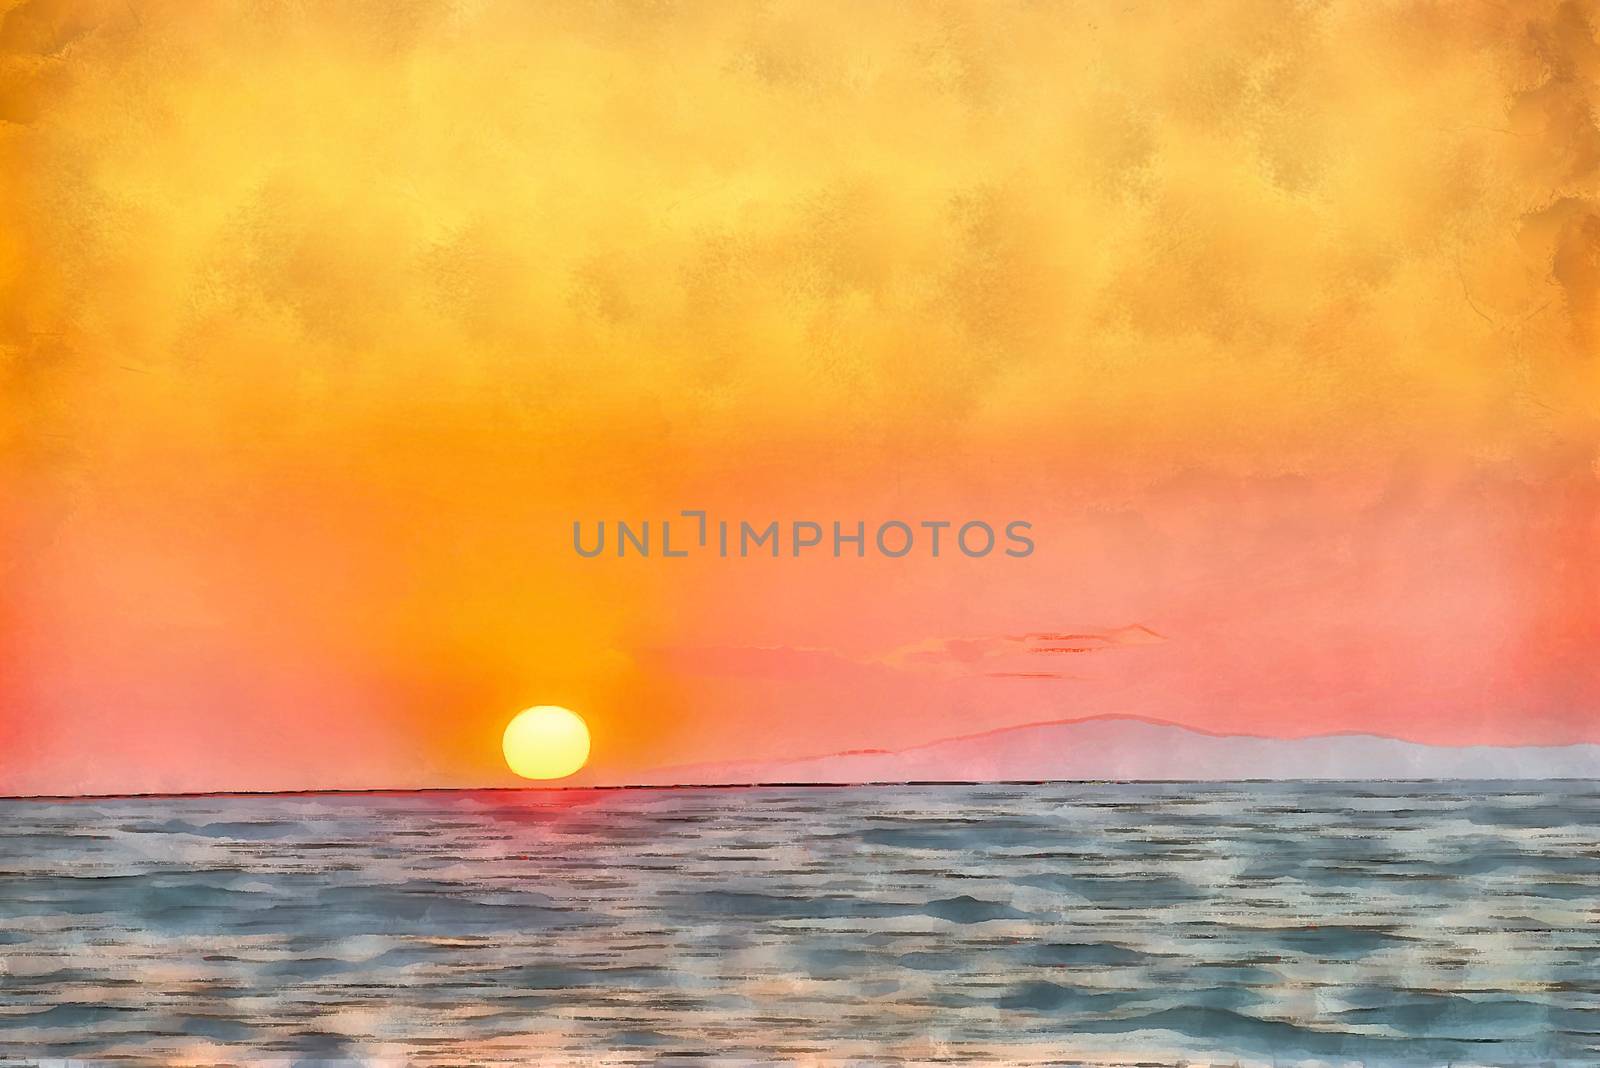 Digital watercolor painting of a sunset on Sithonia (Longos), middle-south part on Chalkidiki peninsula in Greece.